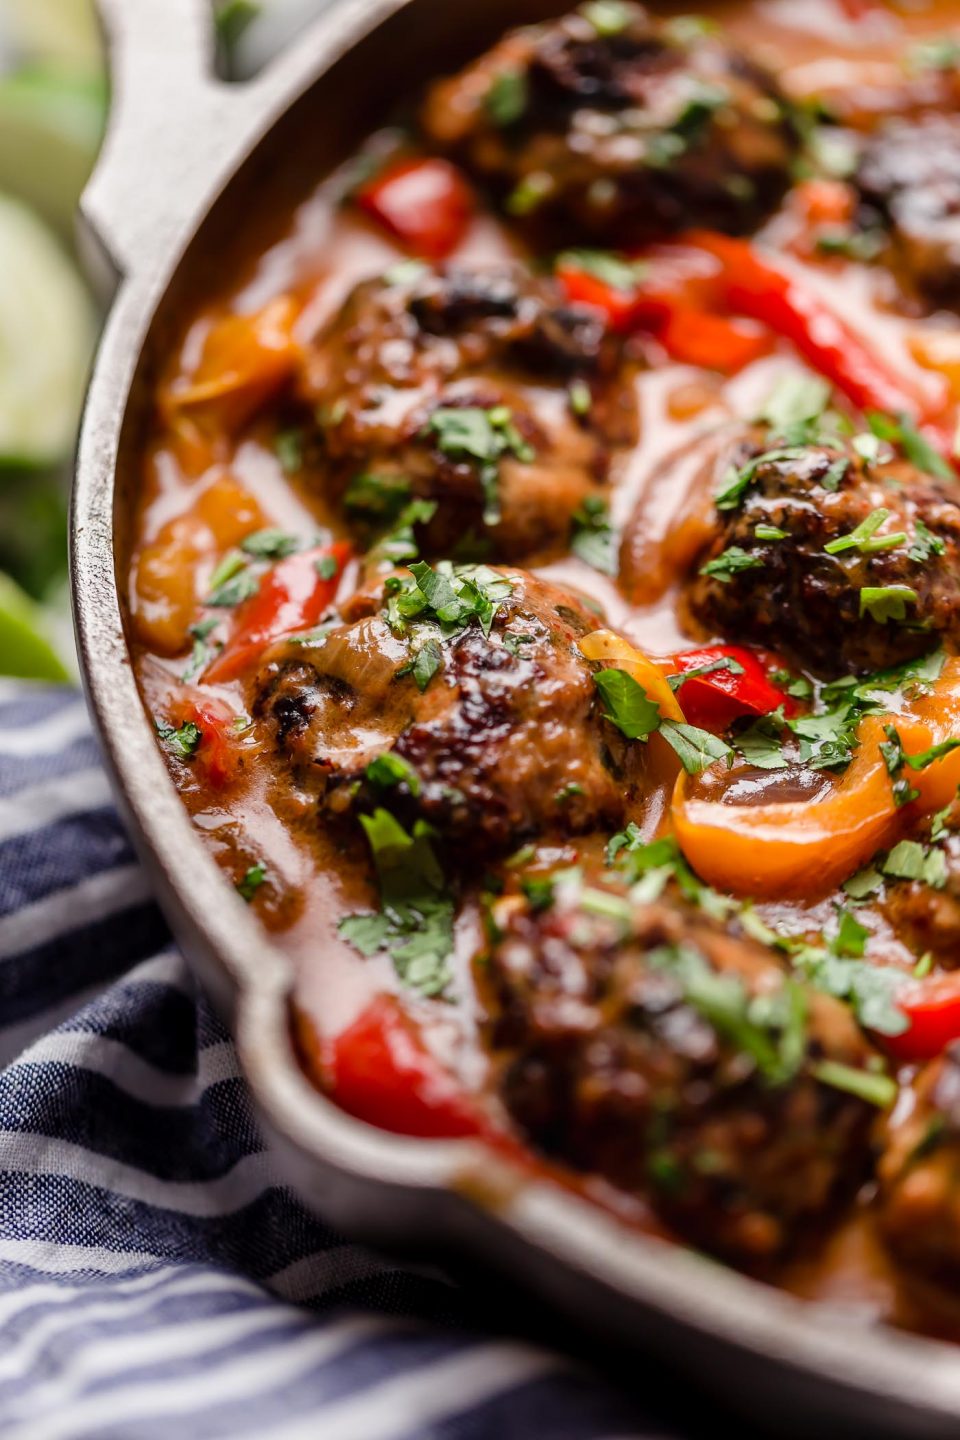 skillet red curry with ginger turkey meatballs. the creamiest red curry with onions, bell peppers, & flavorful turkey meatballs made with tons of ginger, garlic & cilantro - & the best part is it’s all made in one pan! an easy & comforting skillet red curry recipe! #playswellwithbutter #redcurry #easyredcurry #turkeymeatballs #gingermeatballs #healthyrecipe #castiron #skilletrecipe #onepandinners #onepanmeal #castironrecipe